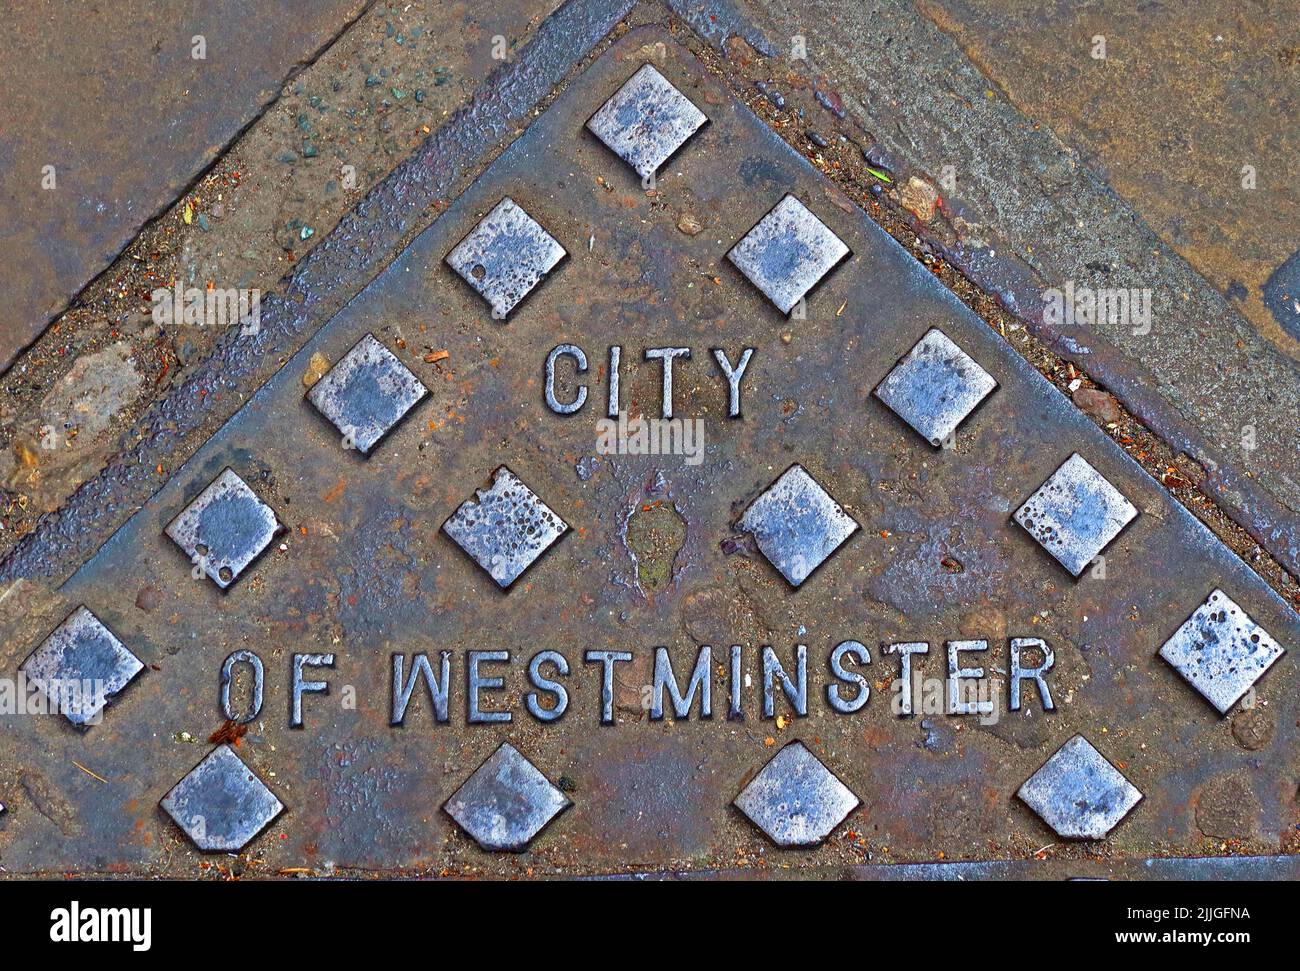 City of Westminster cast iron embossed grid, central London, England, UK, SW1P 2HR Stock Photo